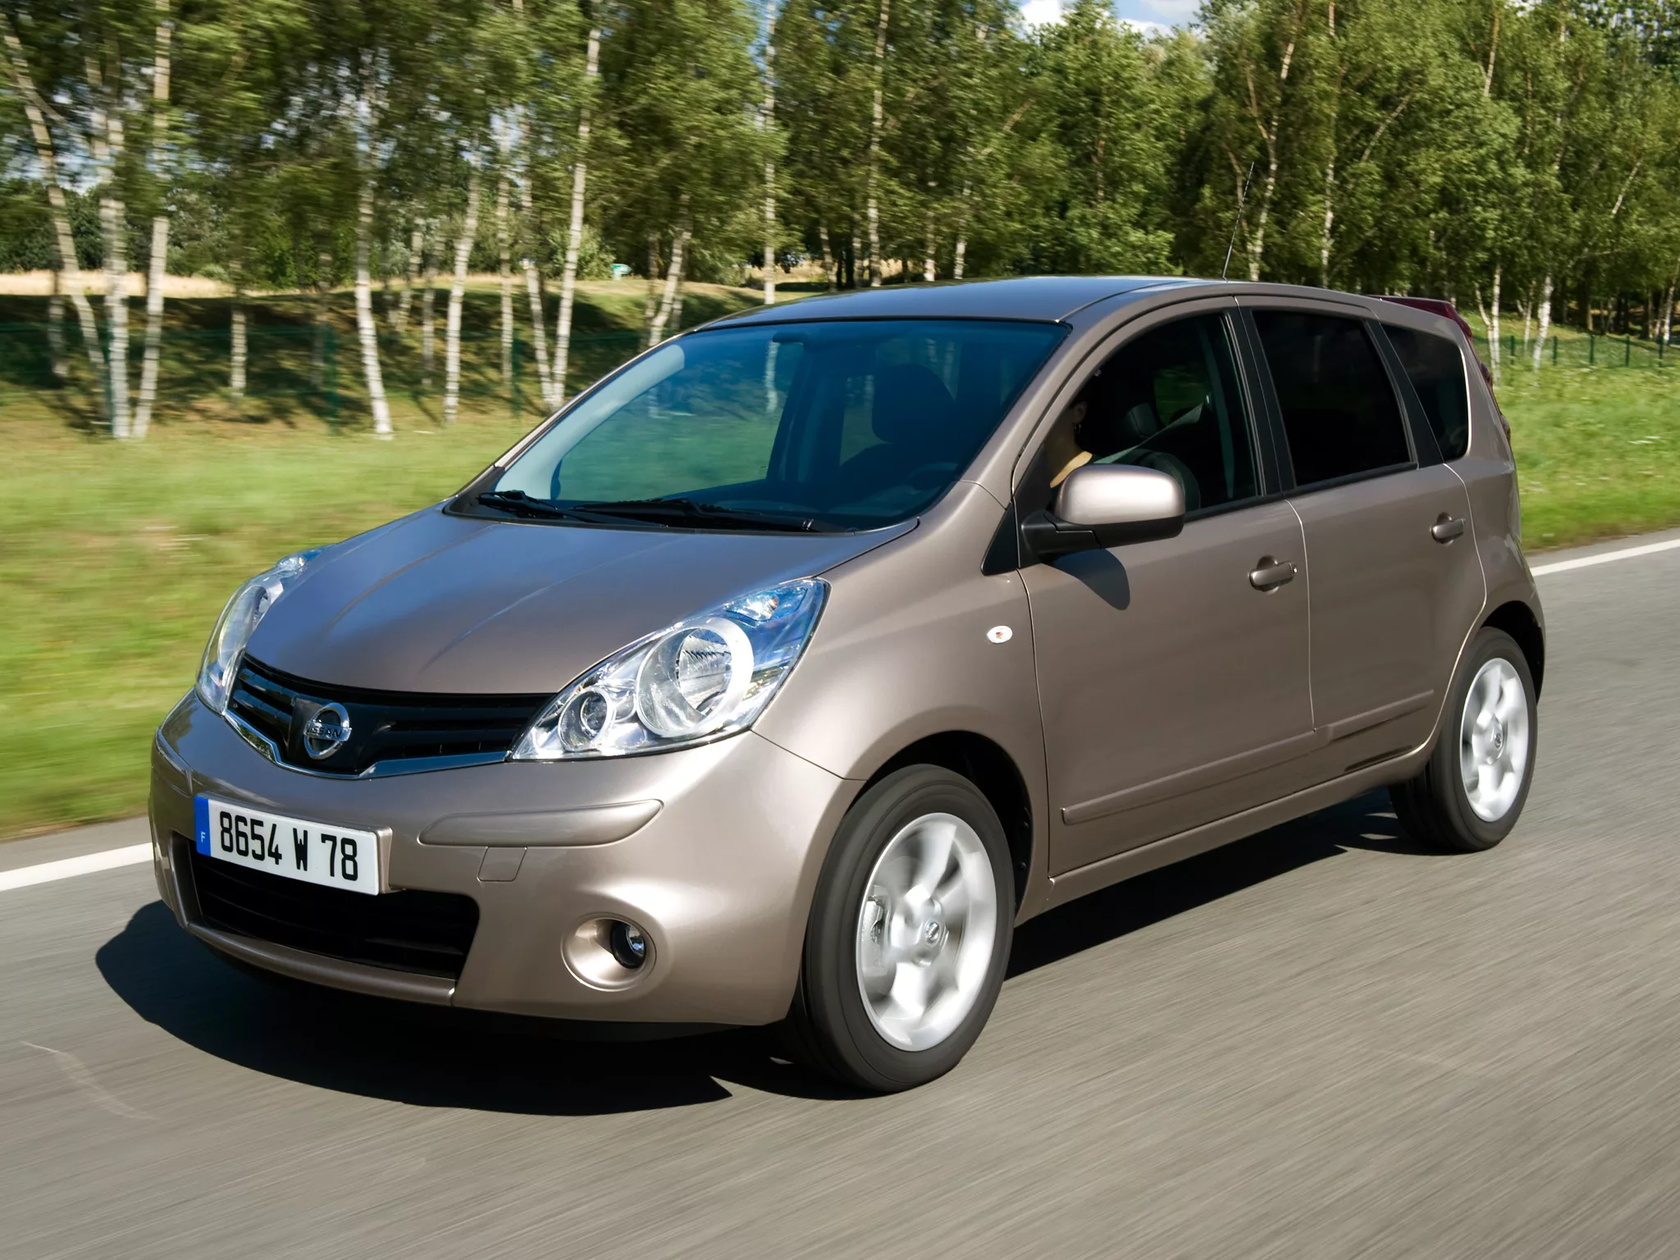 Ниссан ноут е11. Nissan Note 2012. Nissan Note 2009. Nissan Note e11 2010. Note 11 2